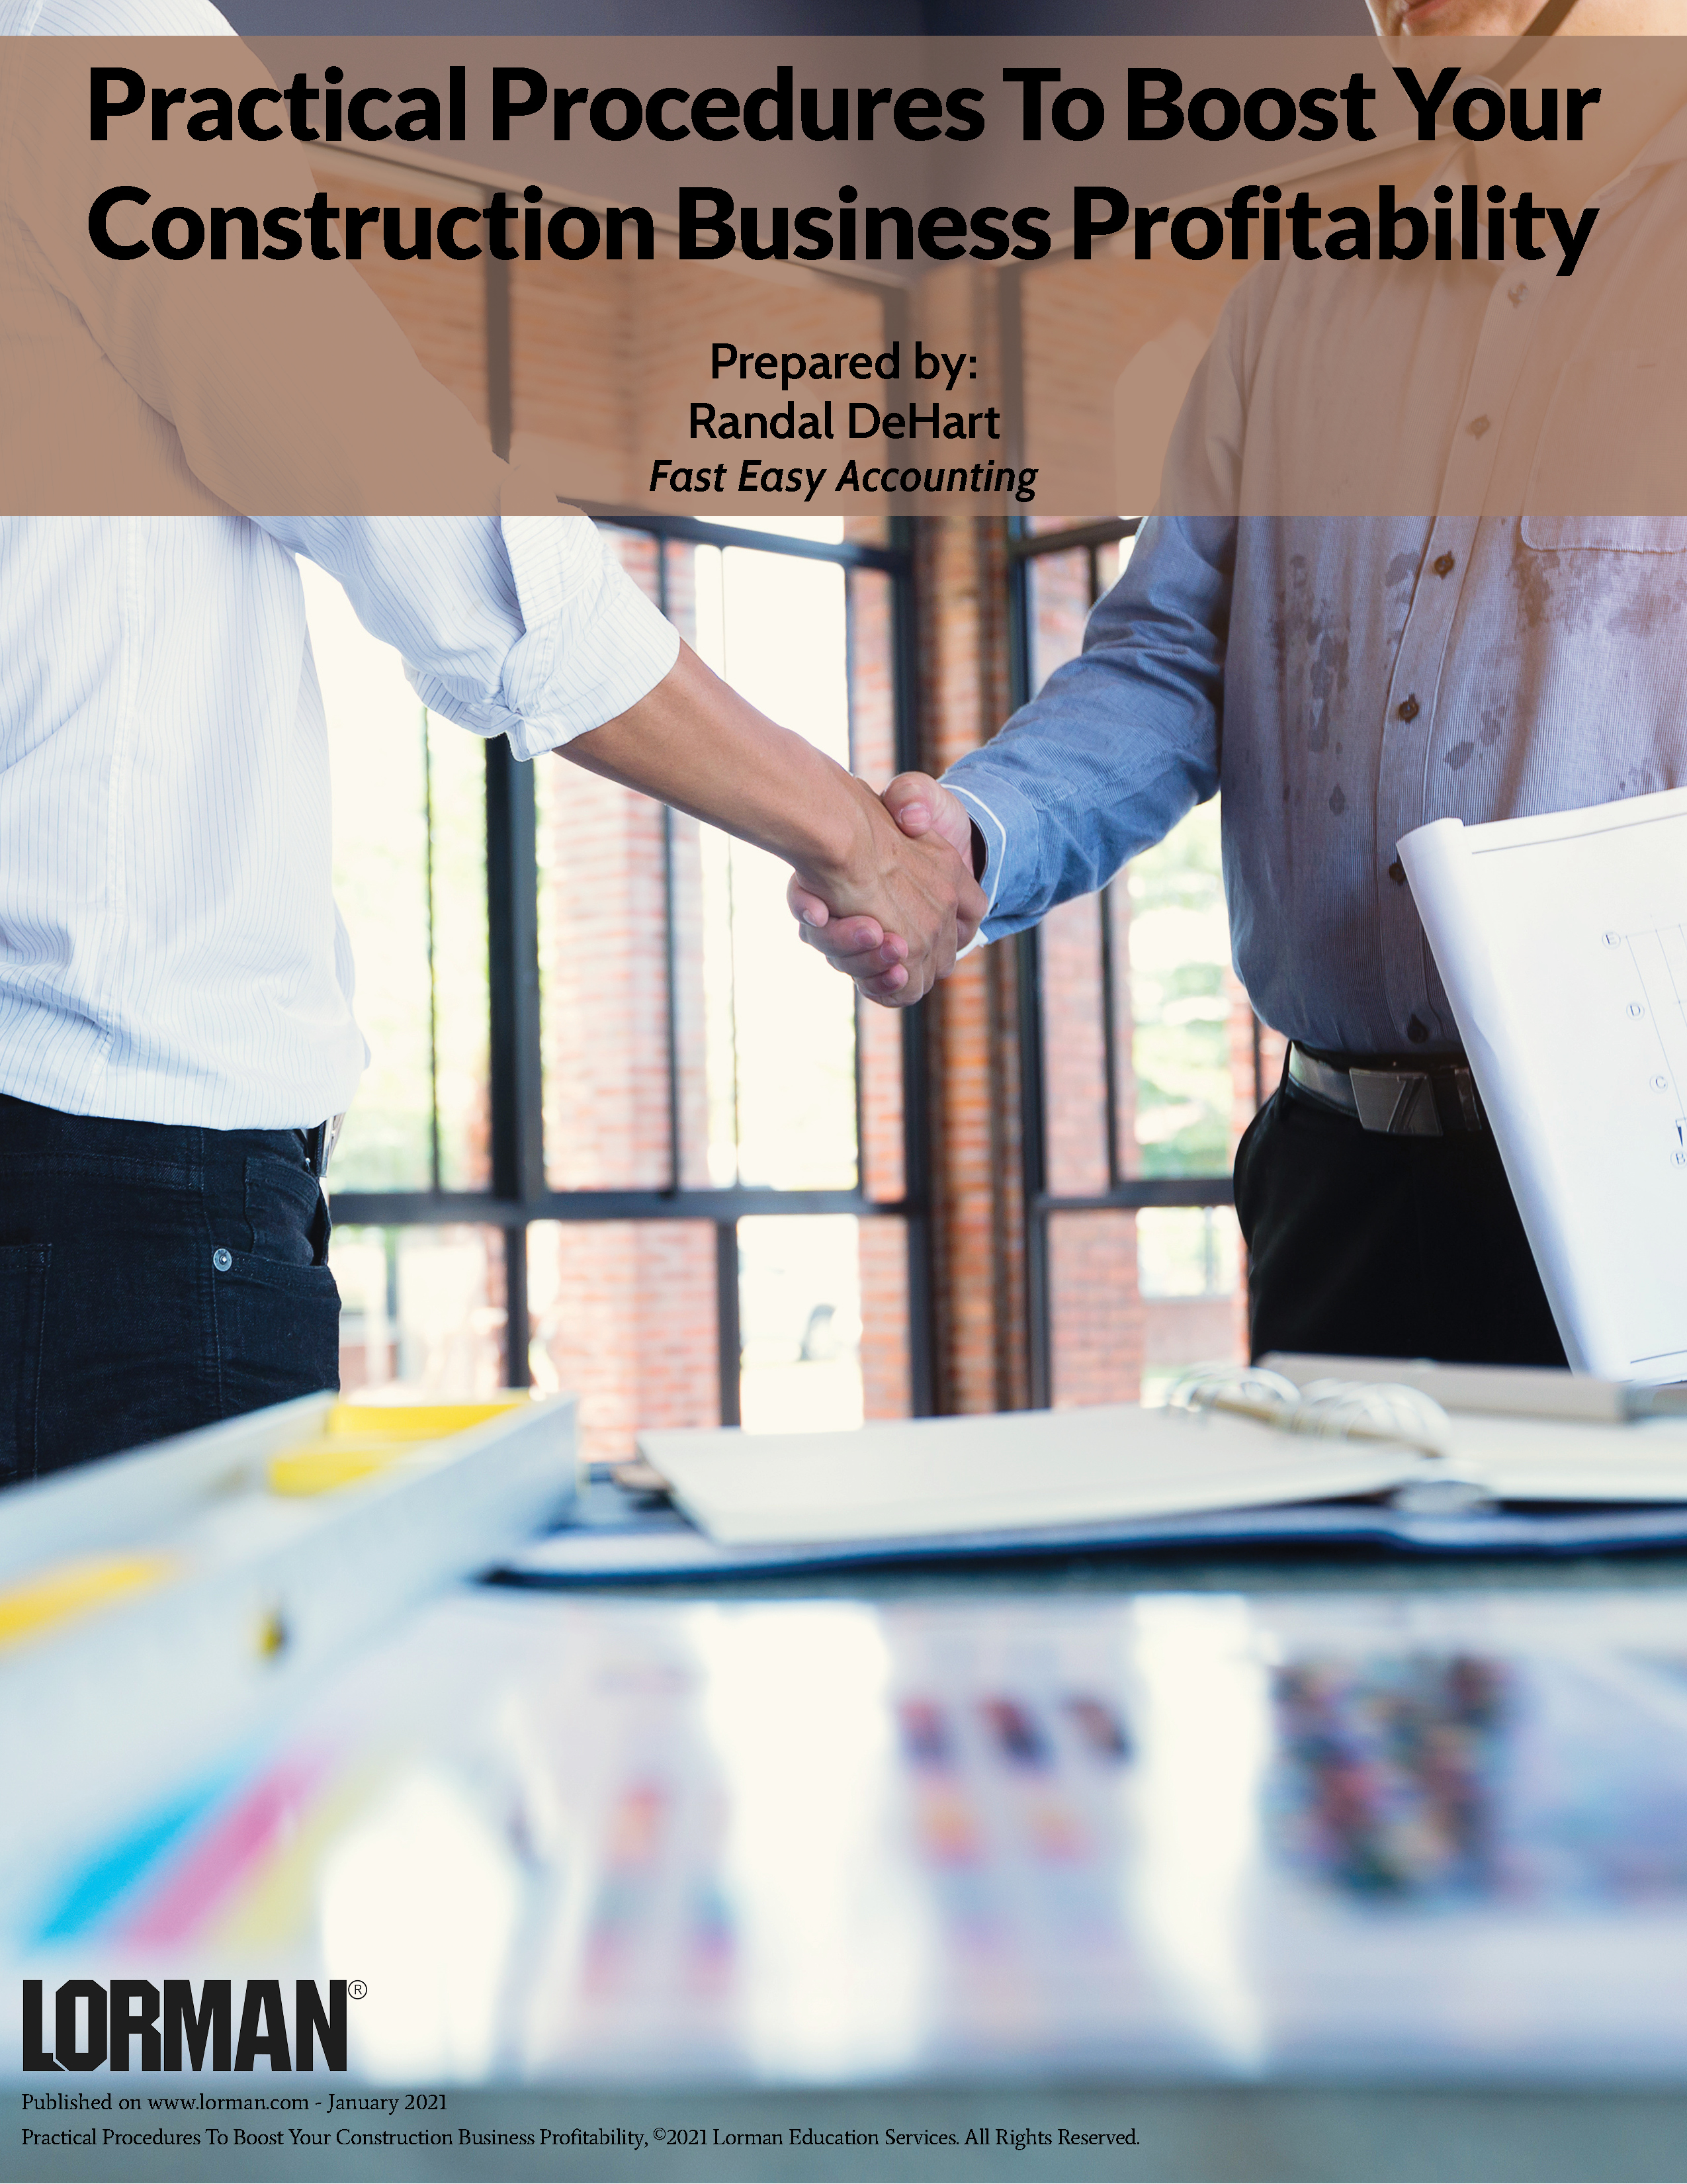 Practical Procedures To Boost Your Construction Business Profitability